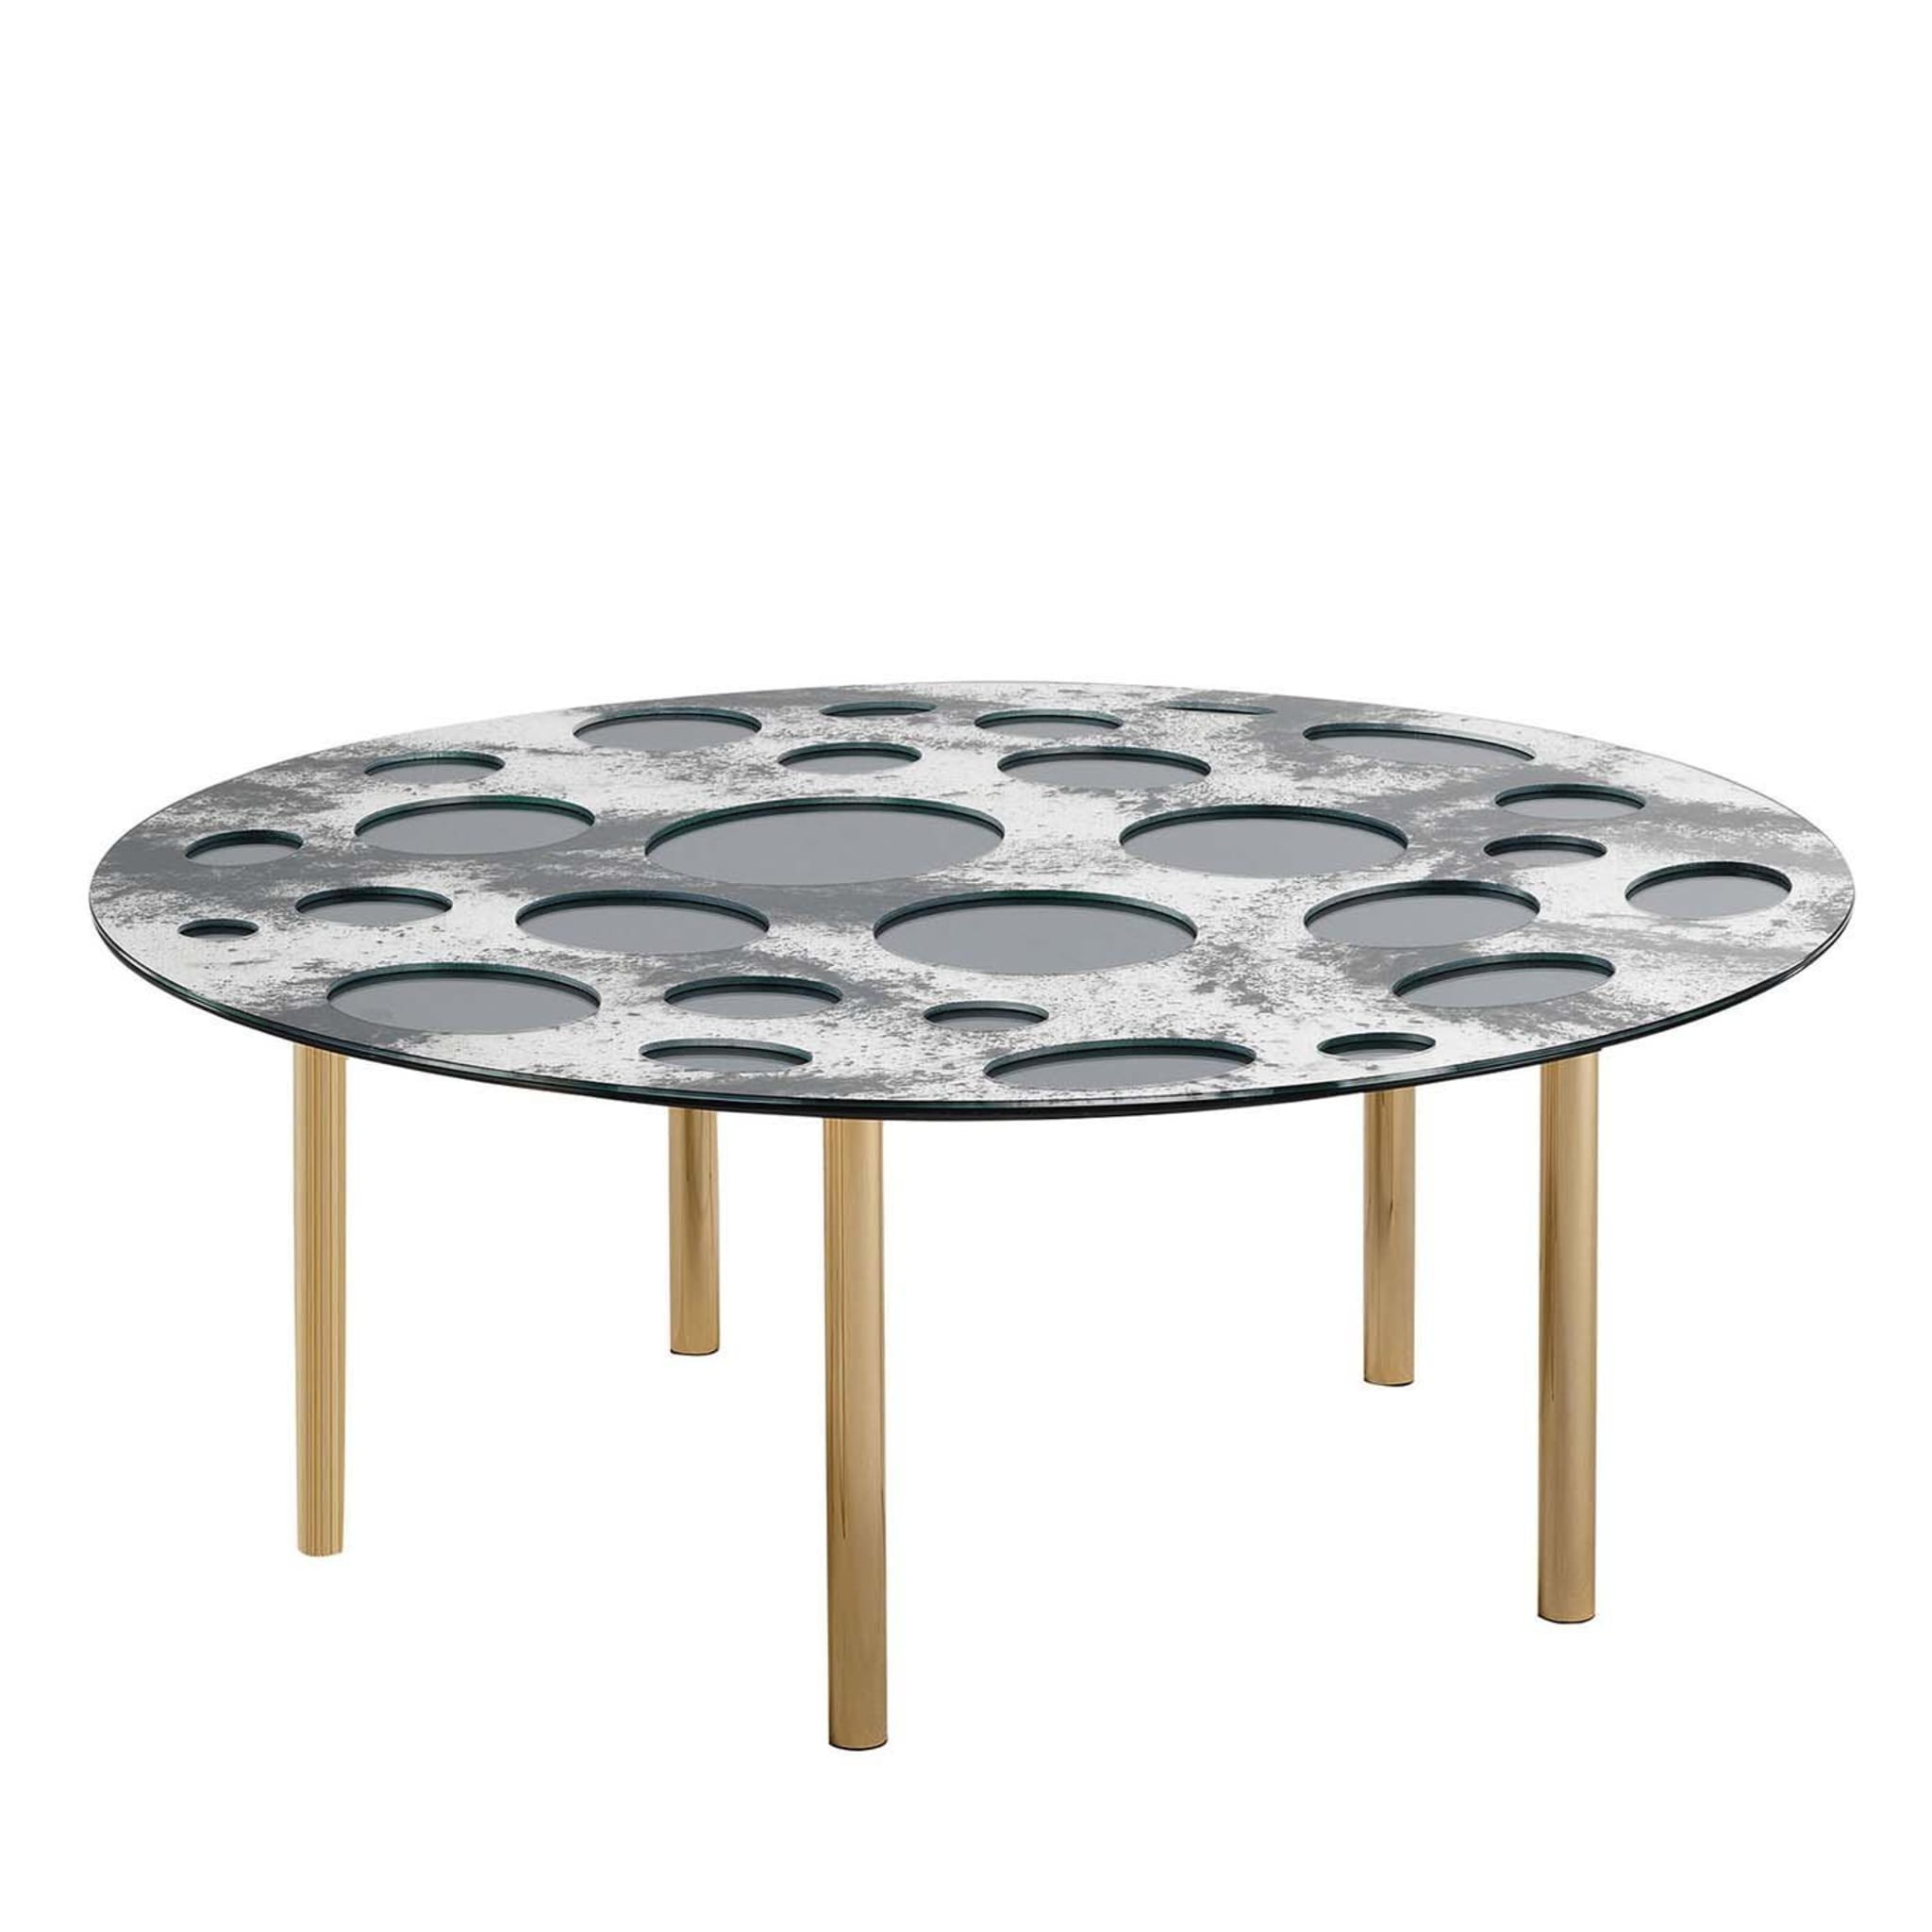 Venny Large Central Table by Matteo Cibic - Main view